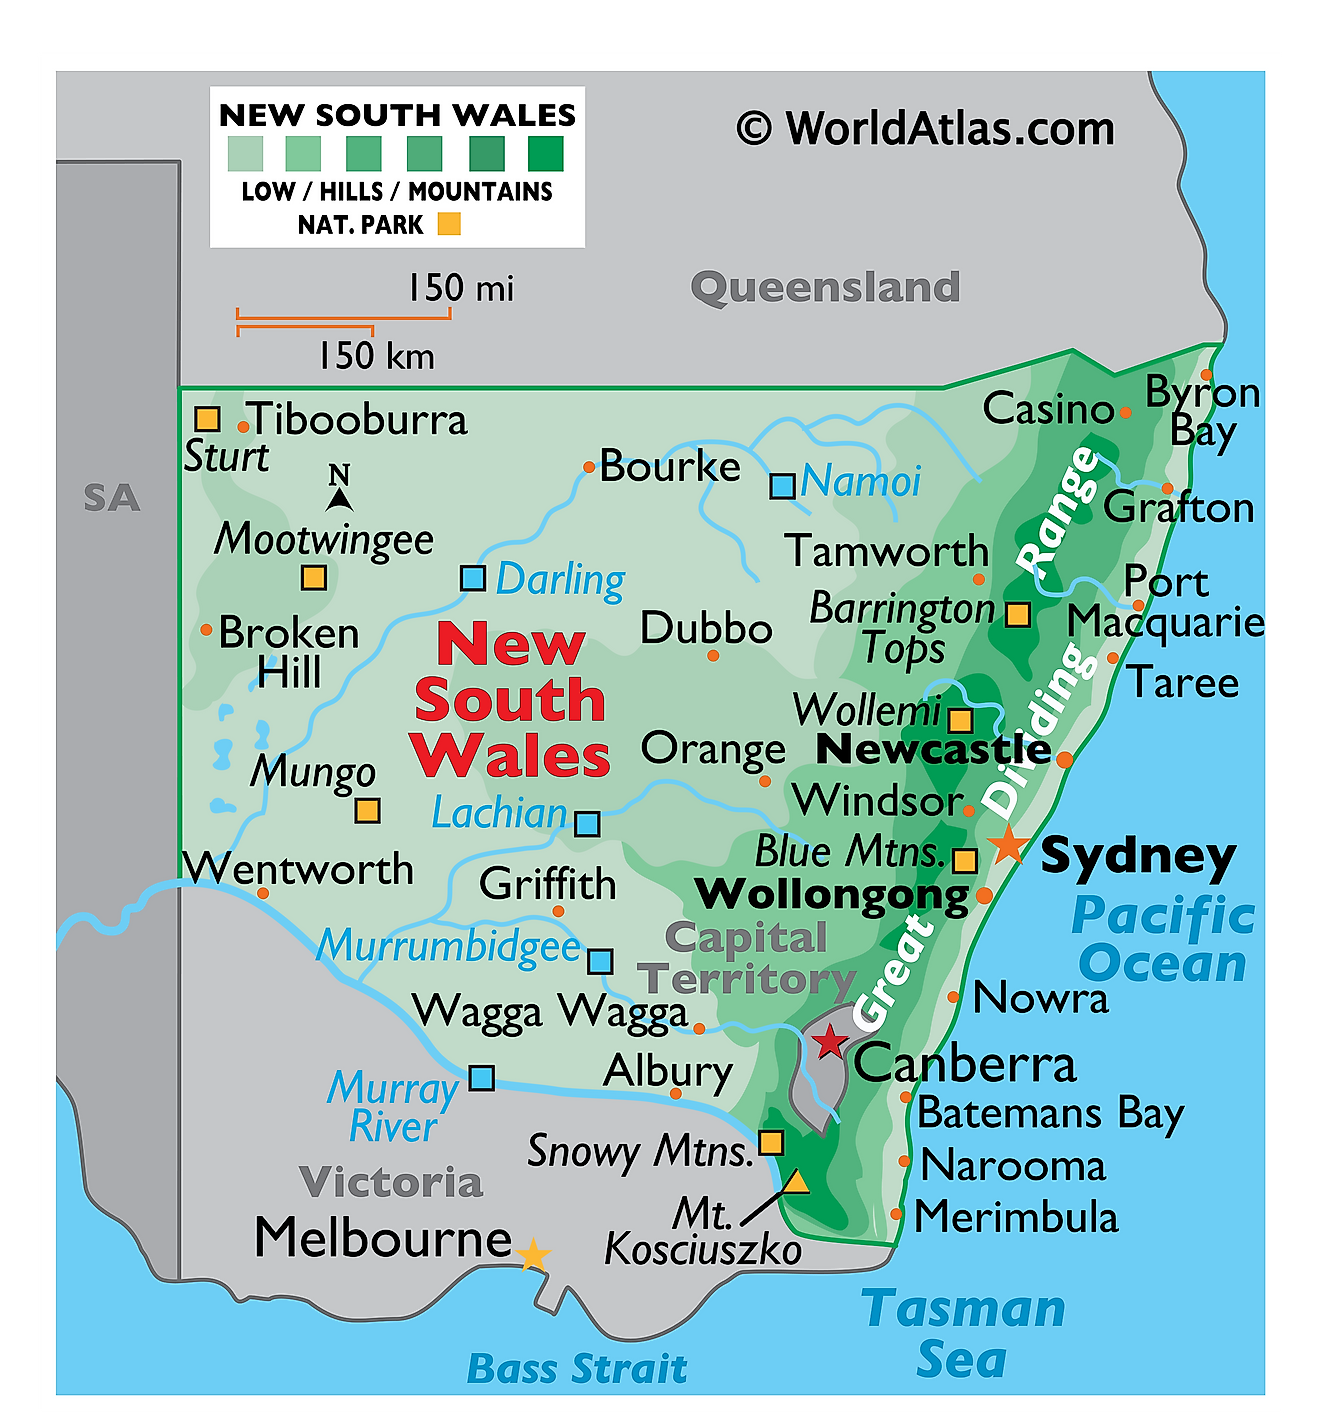 New South Wales Maps & Facts - World Atlas